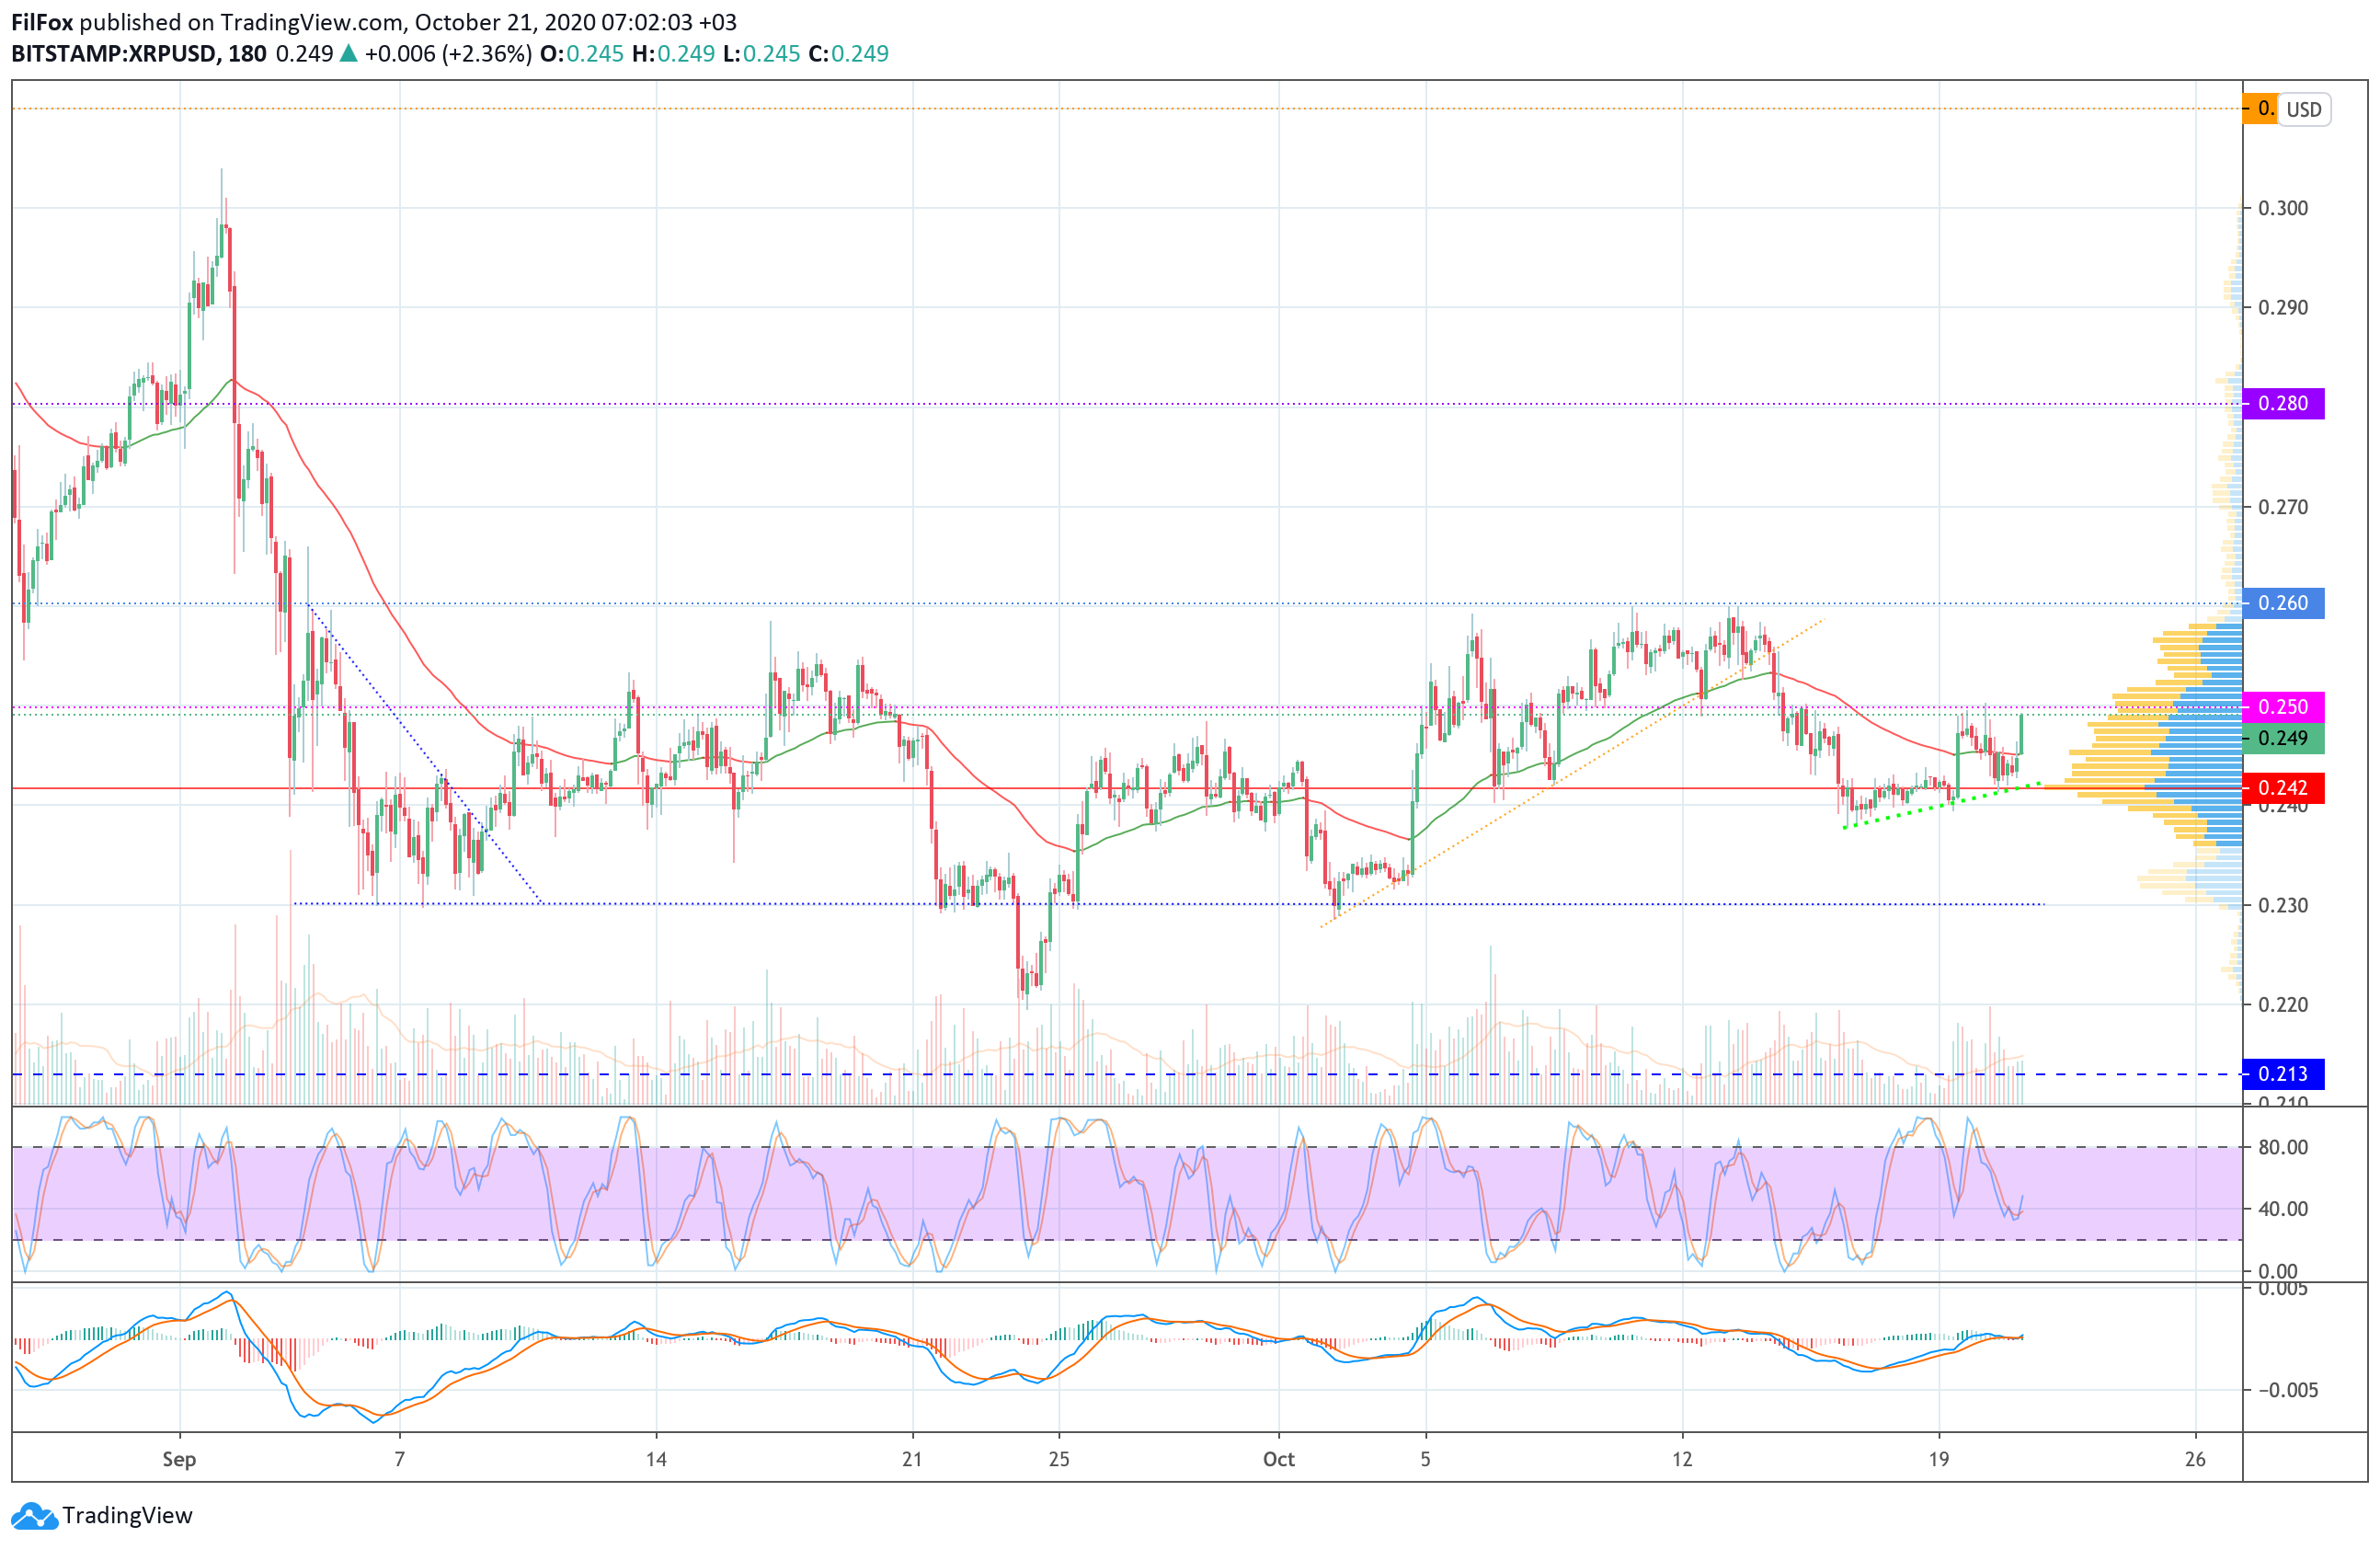 Analysis of the prices of Bitcoin, Ethereum, XRP for 10/21/2020